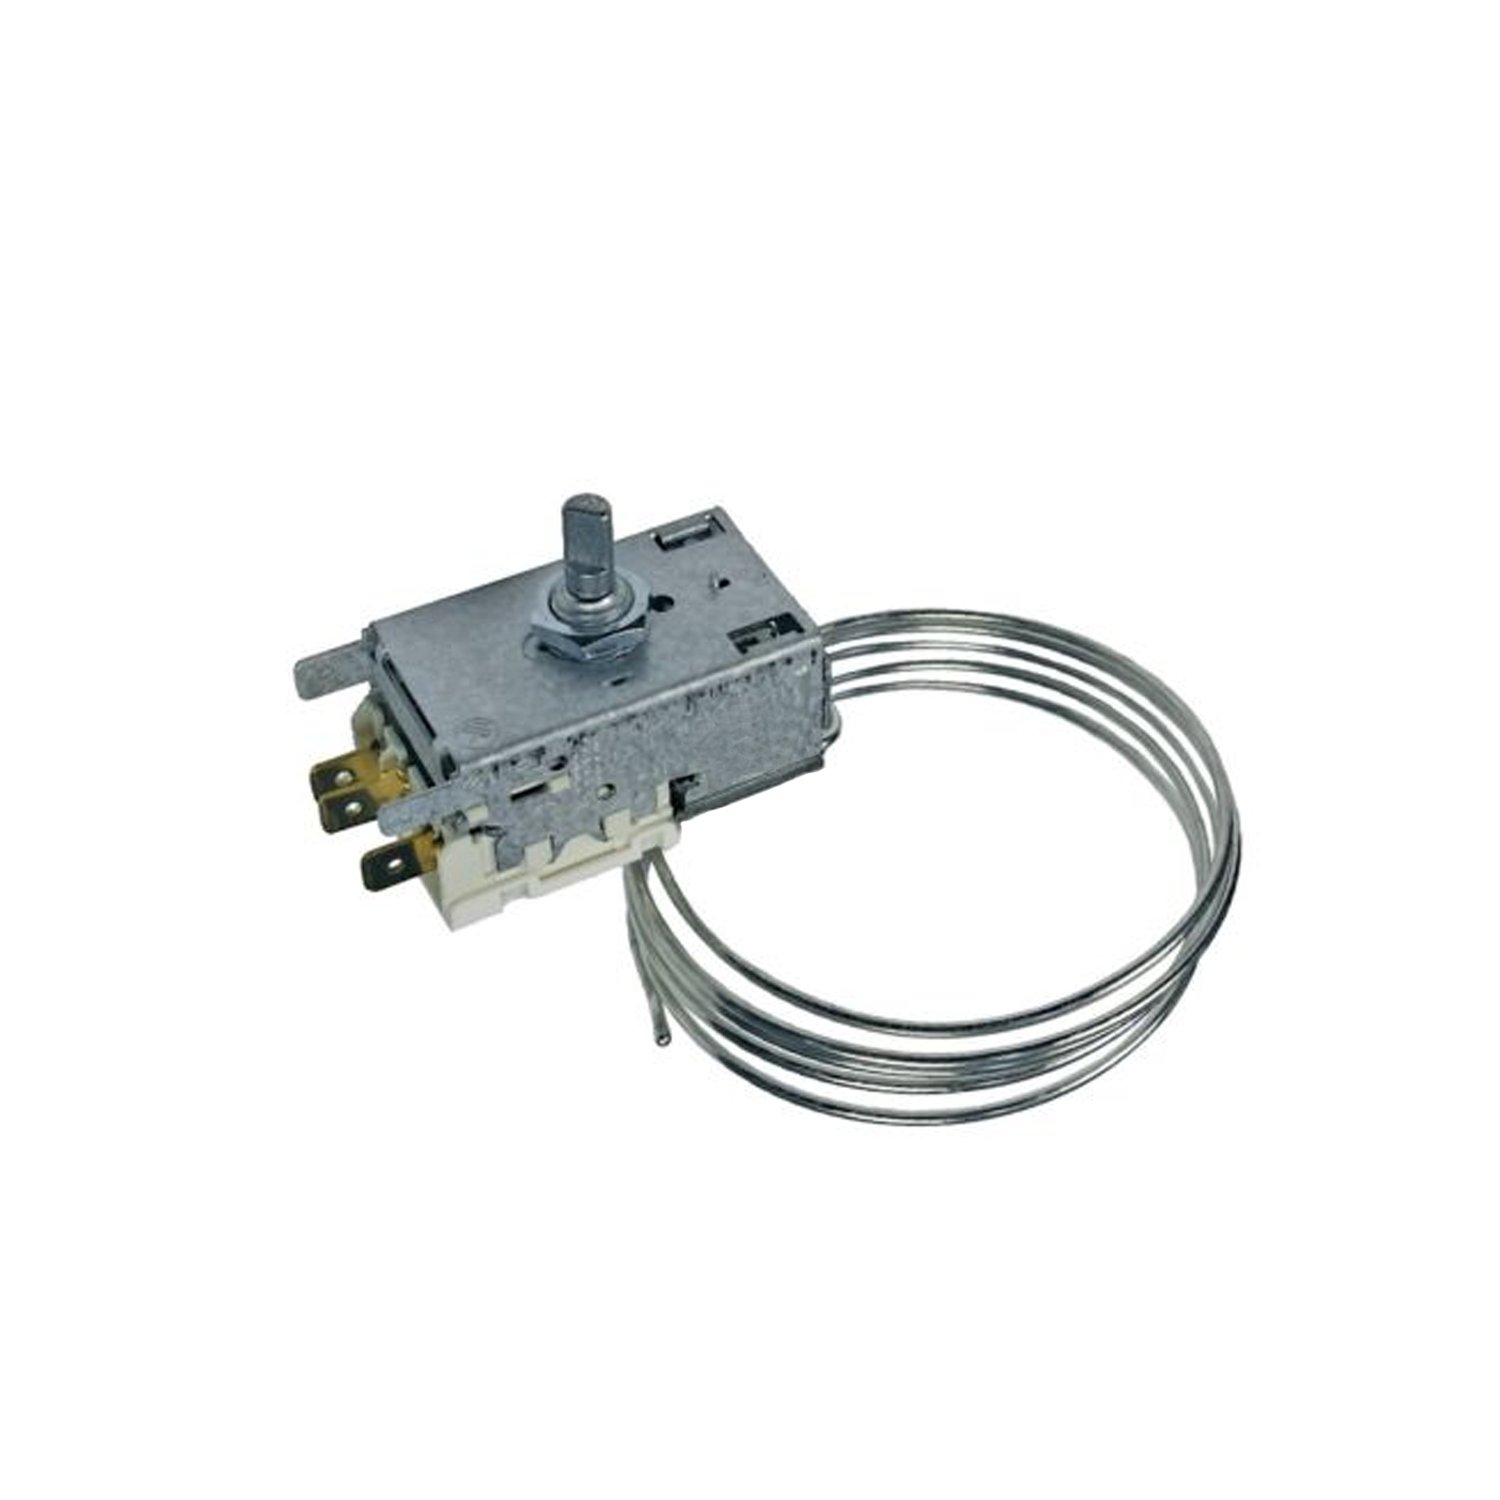 Thermostat Ranco K59-L2717 for refrigerator AEG 2262146463, cold from -27 ° C to + 5 ° C, warm from -9 ° C, to + 5 ° C ,, L 1200 mm, 6.3mm AMP